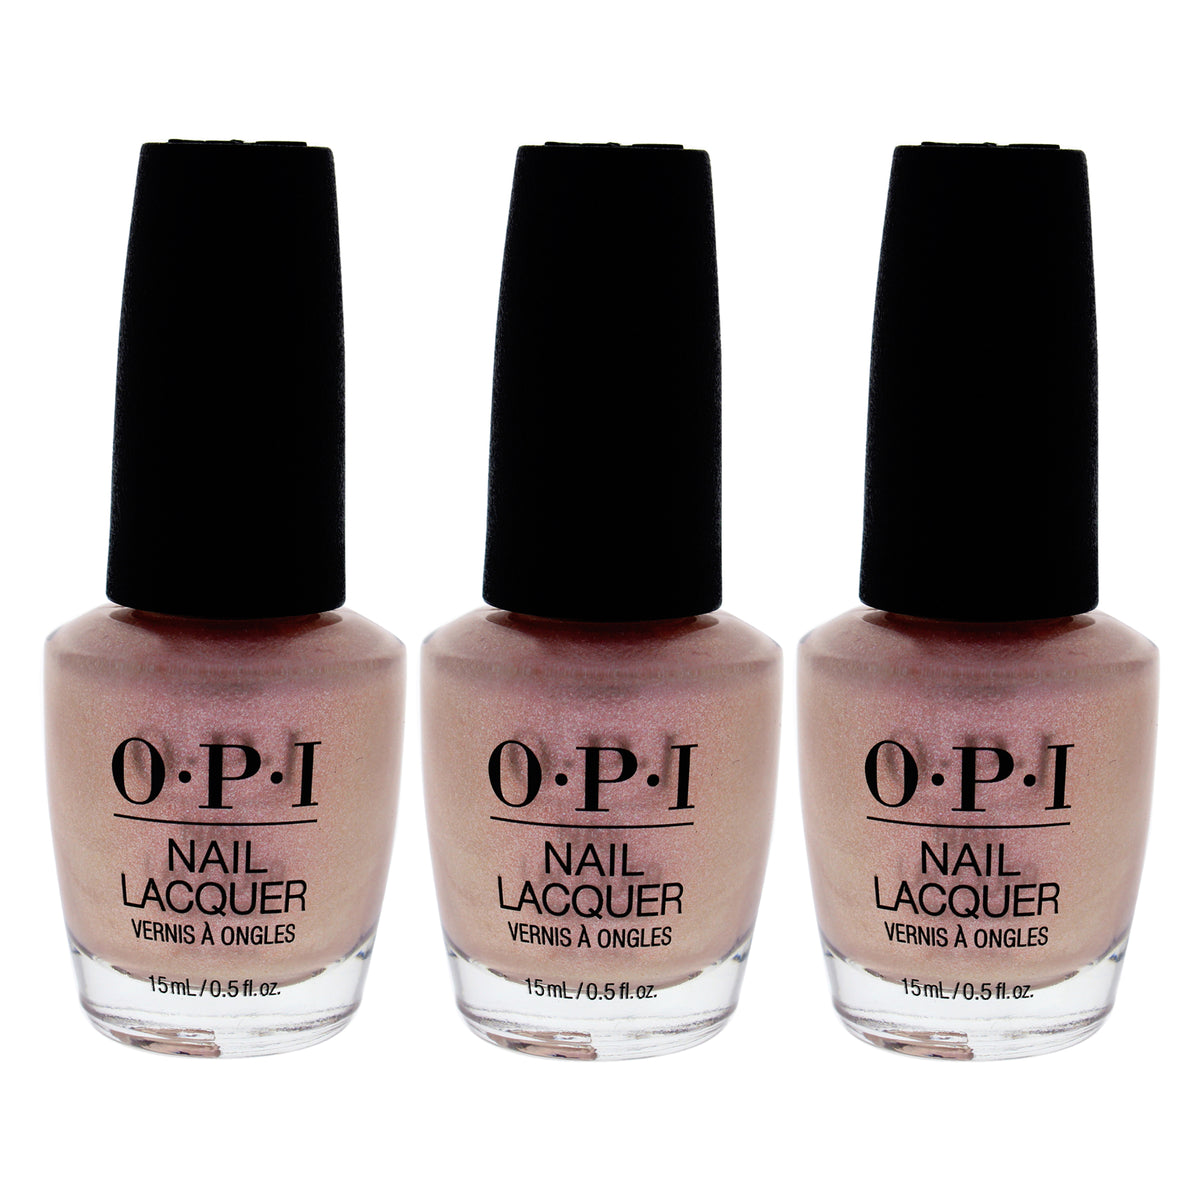 Nail Lacquer - NL SH2 Throw Me A Kiss by OPI for Women - 0.5 oz Nail Polish - Pack of 3